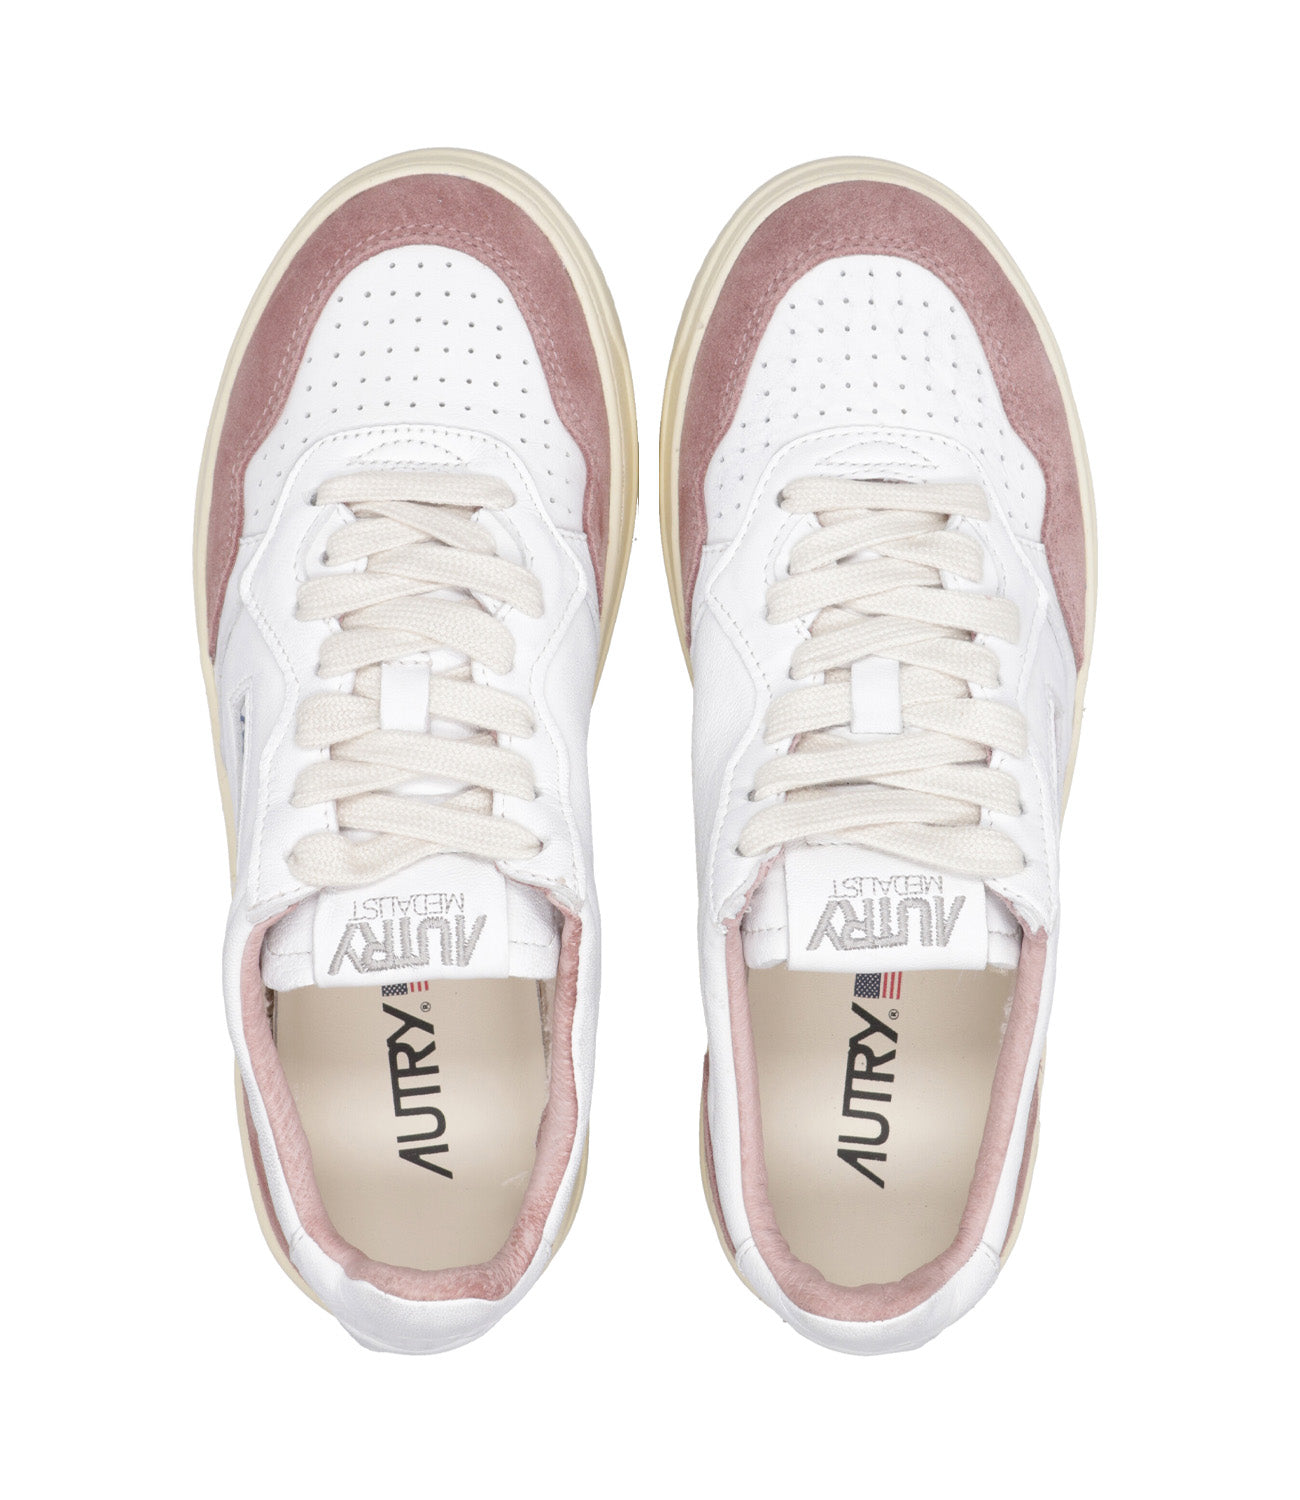 Autry | Sneakers Medalist Low Bianco e Rosa